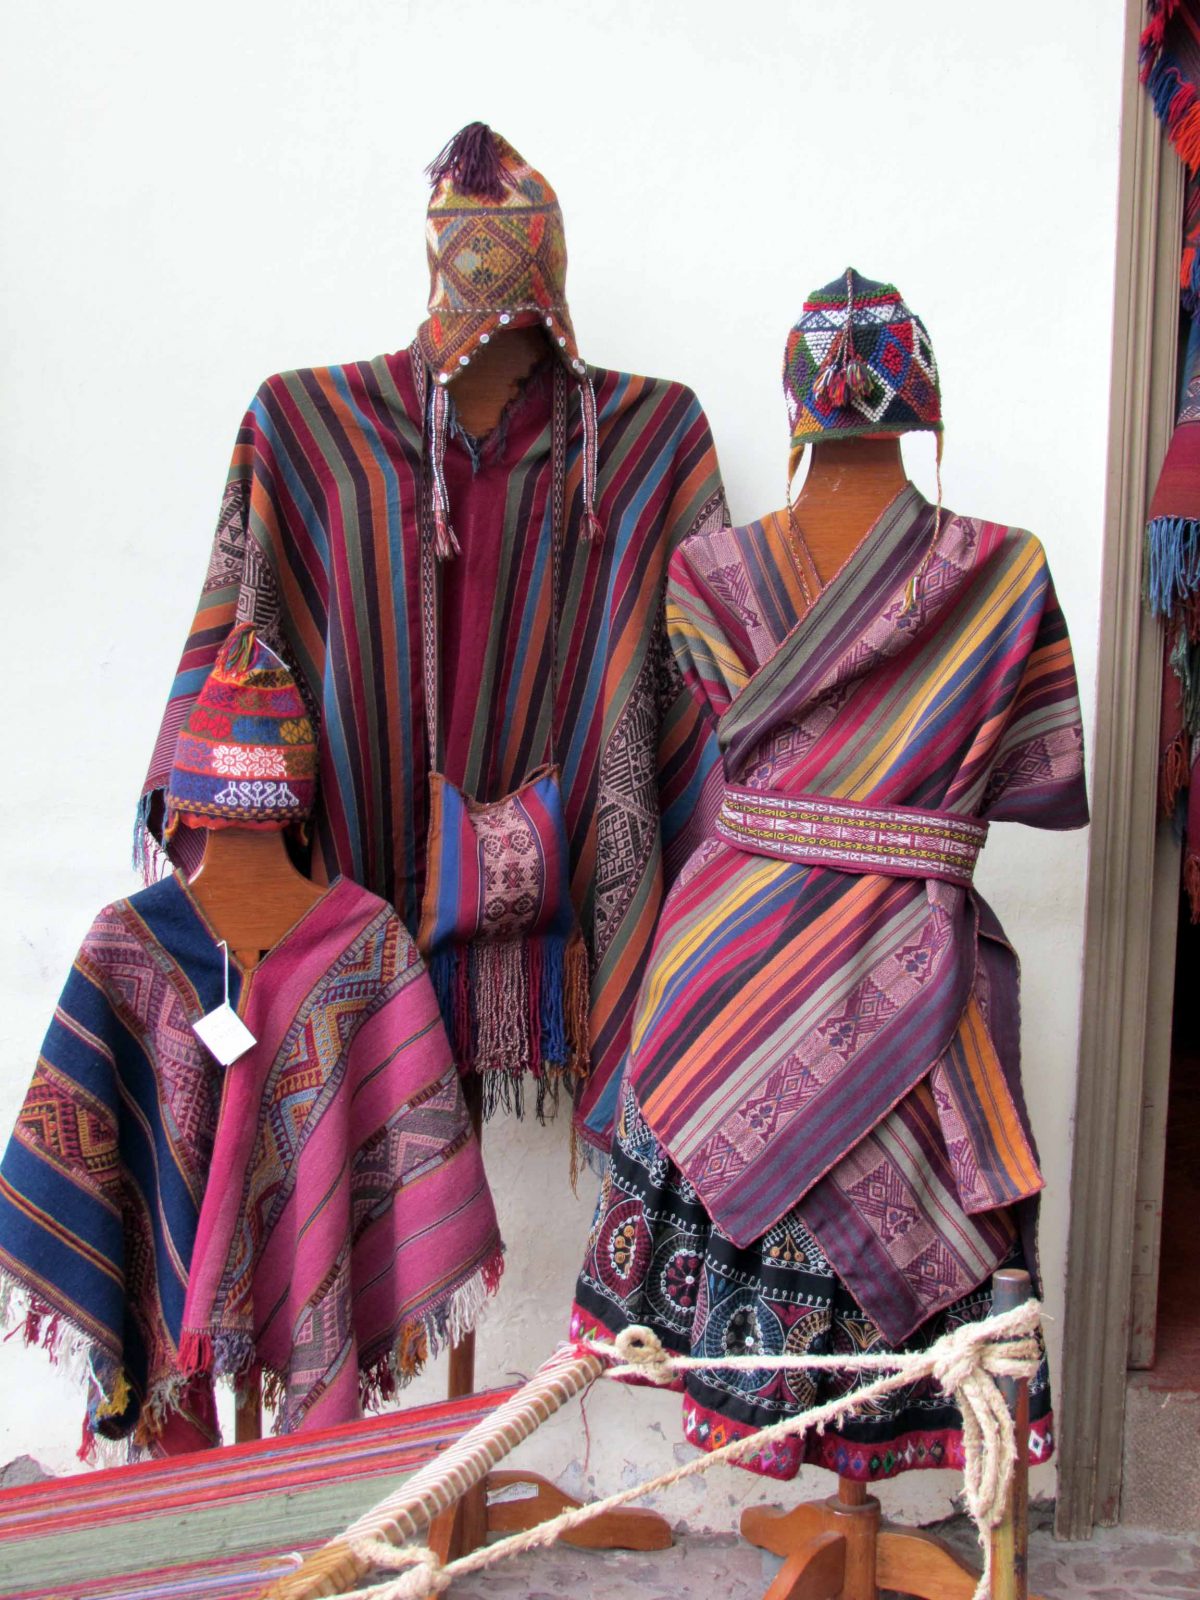 Samples of work for sale; The Center for Traditional Textiles of Cusco, Peru | ©Angela Drake